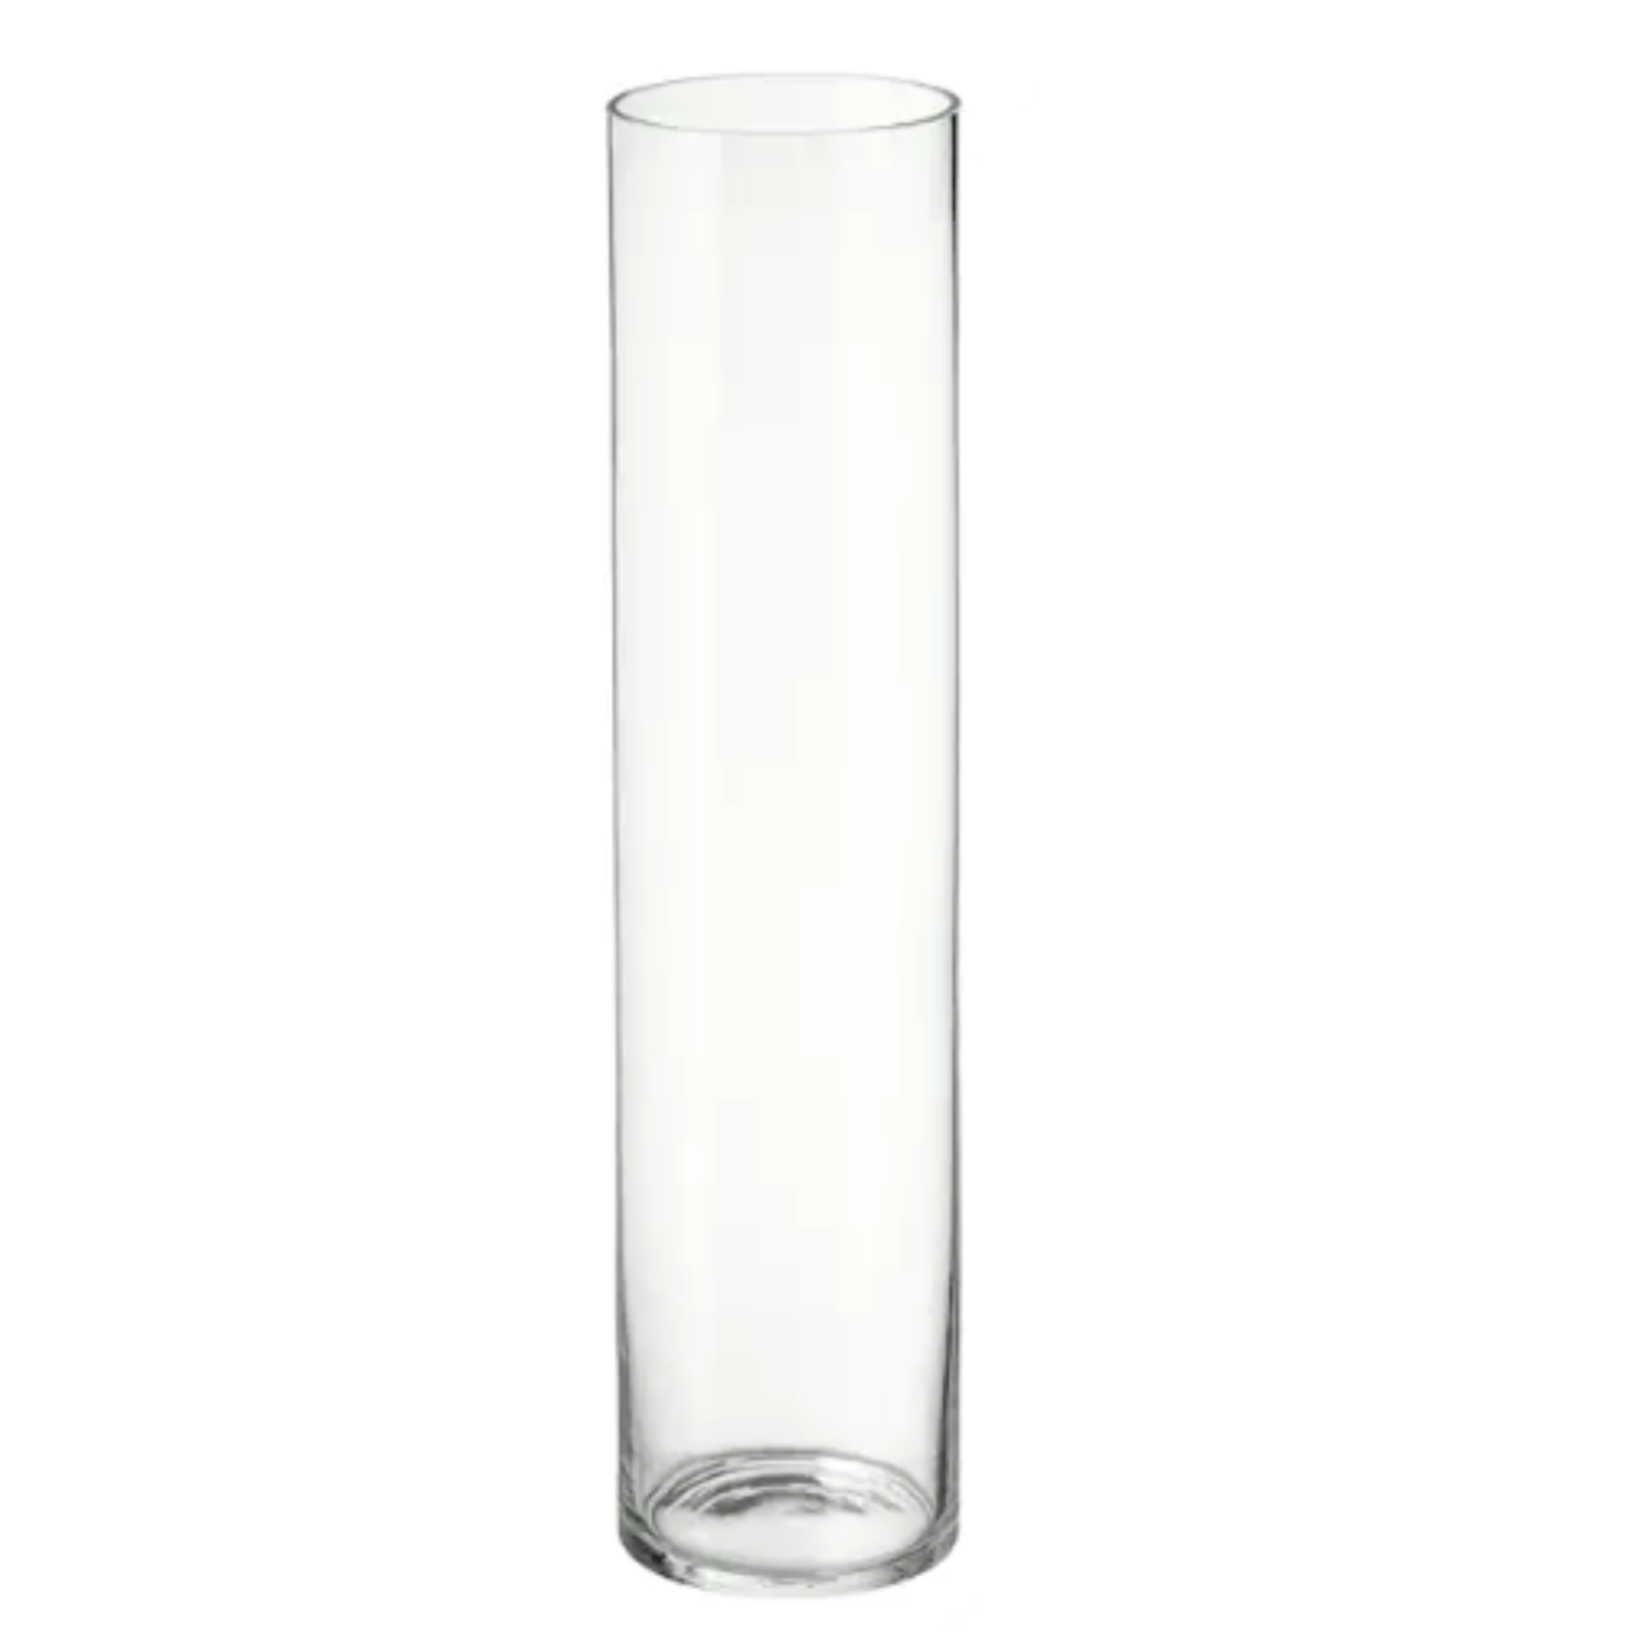 20"H X 10" CLEAR GLASS CYLINDER VASE